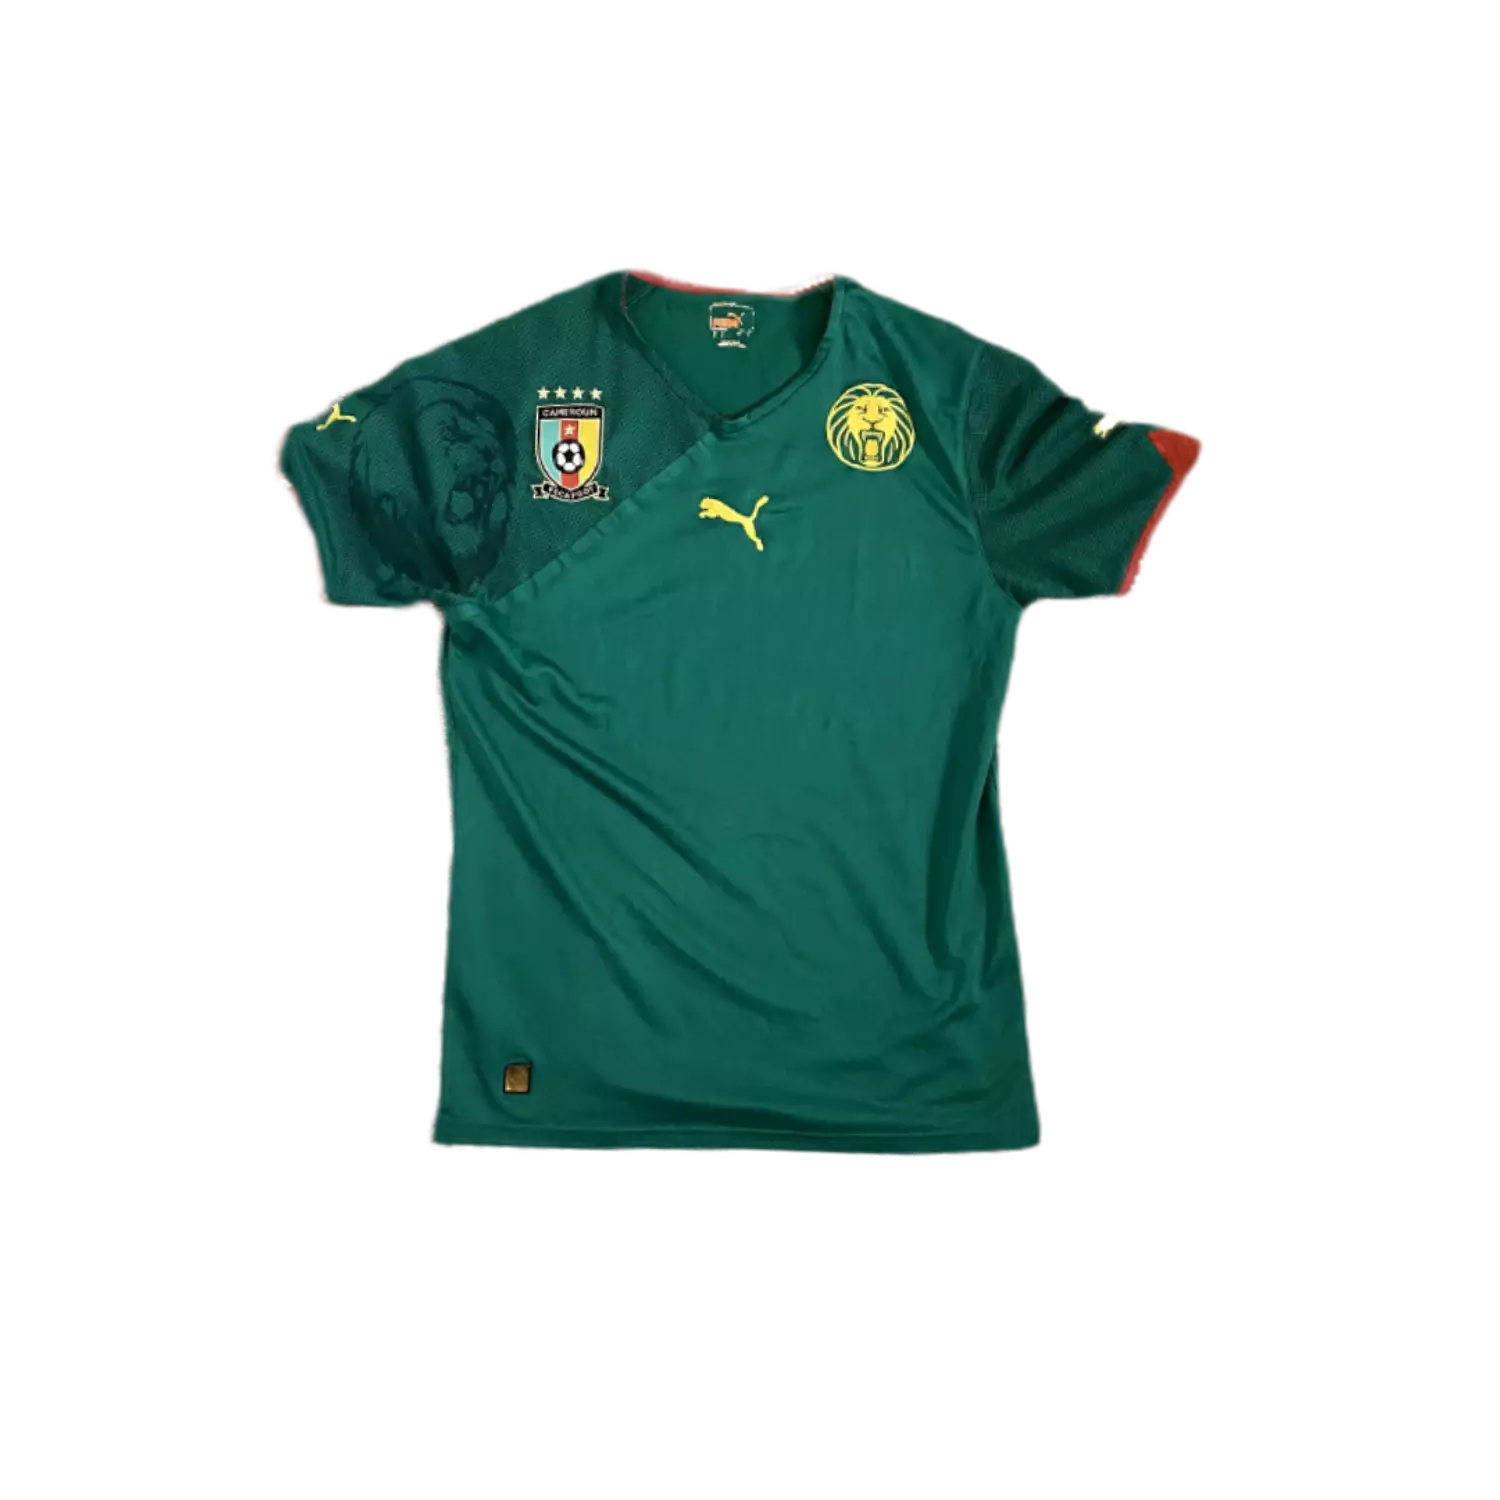 Cameroon 2010 Away Kit (S) hover image